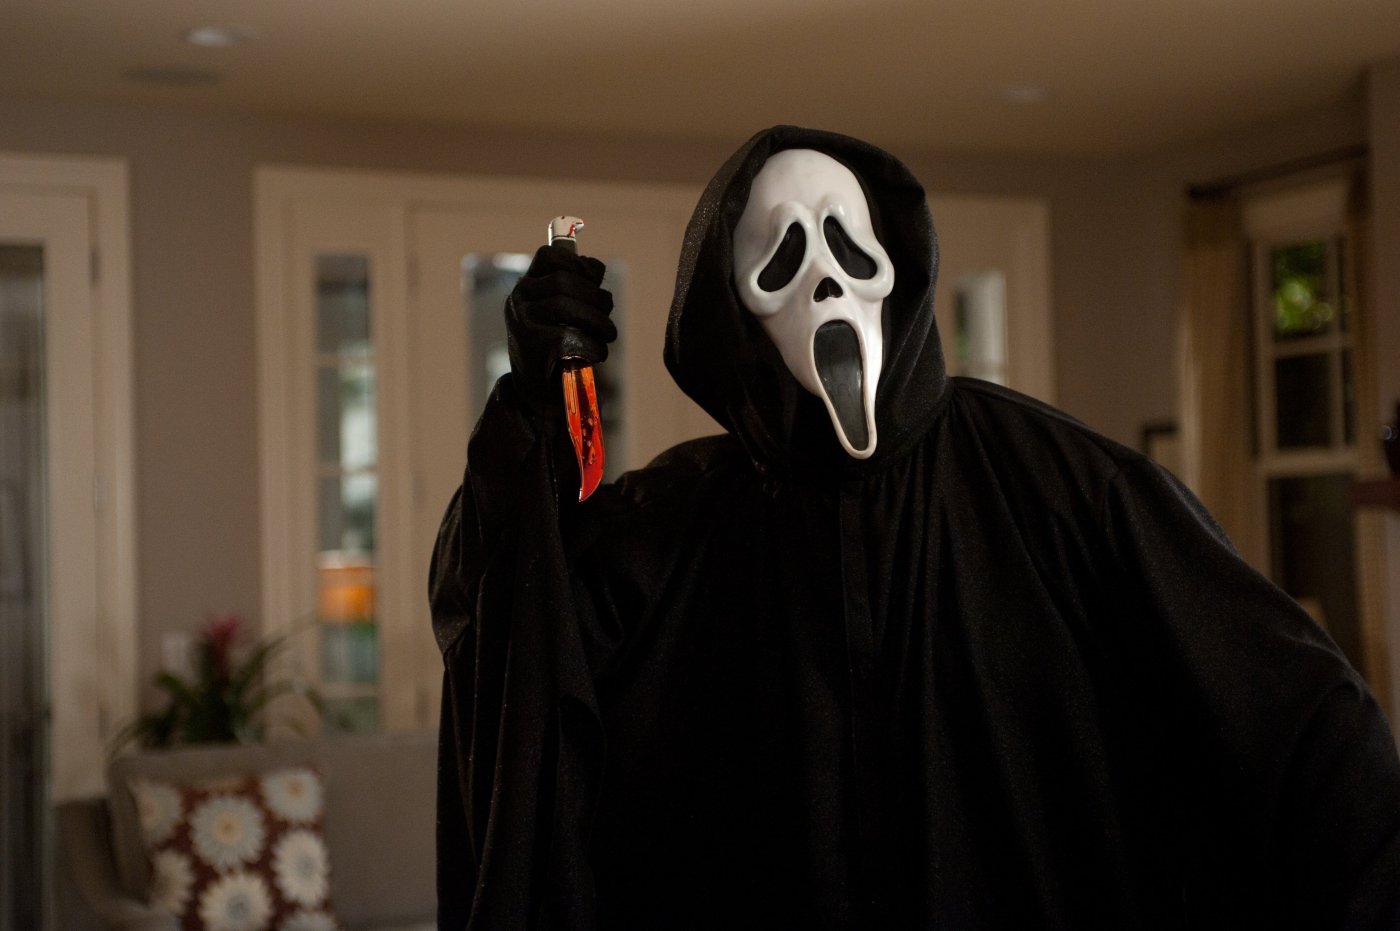 The character from Scream was probably the reason your girlfriend dumped you when you asked her "What is your favorite scary movie?"